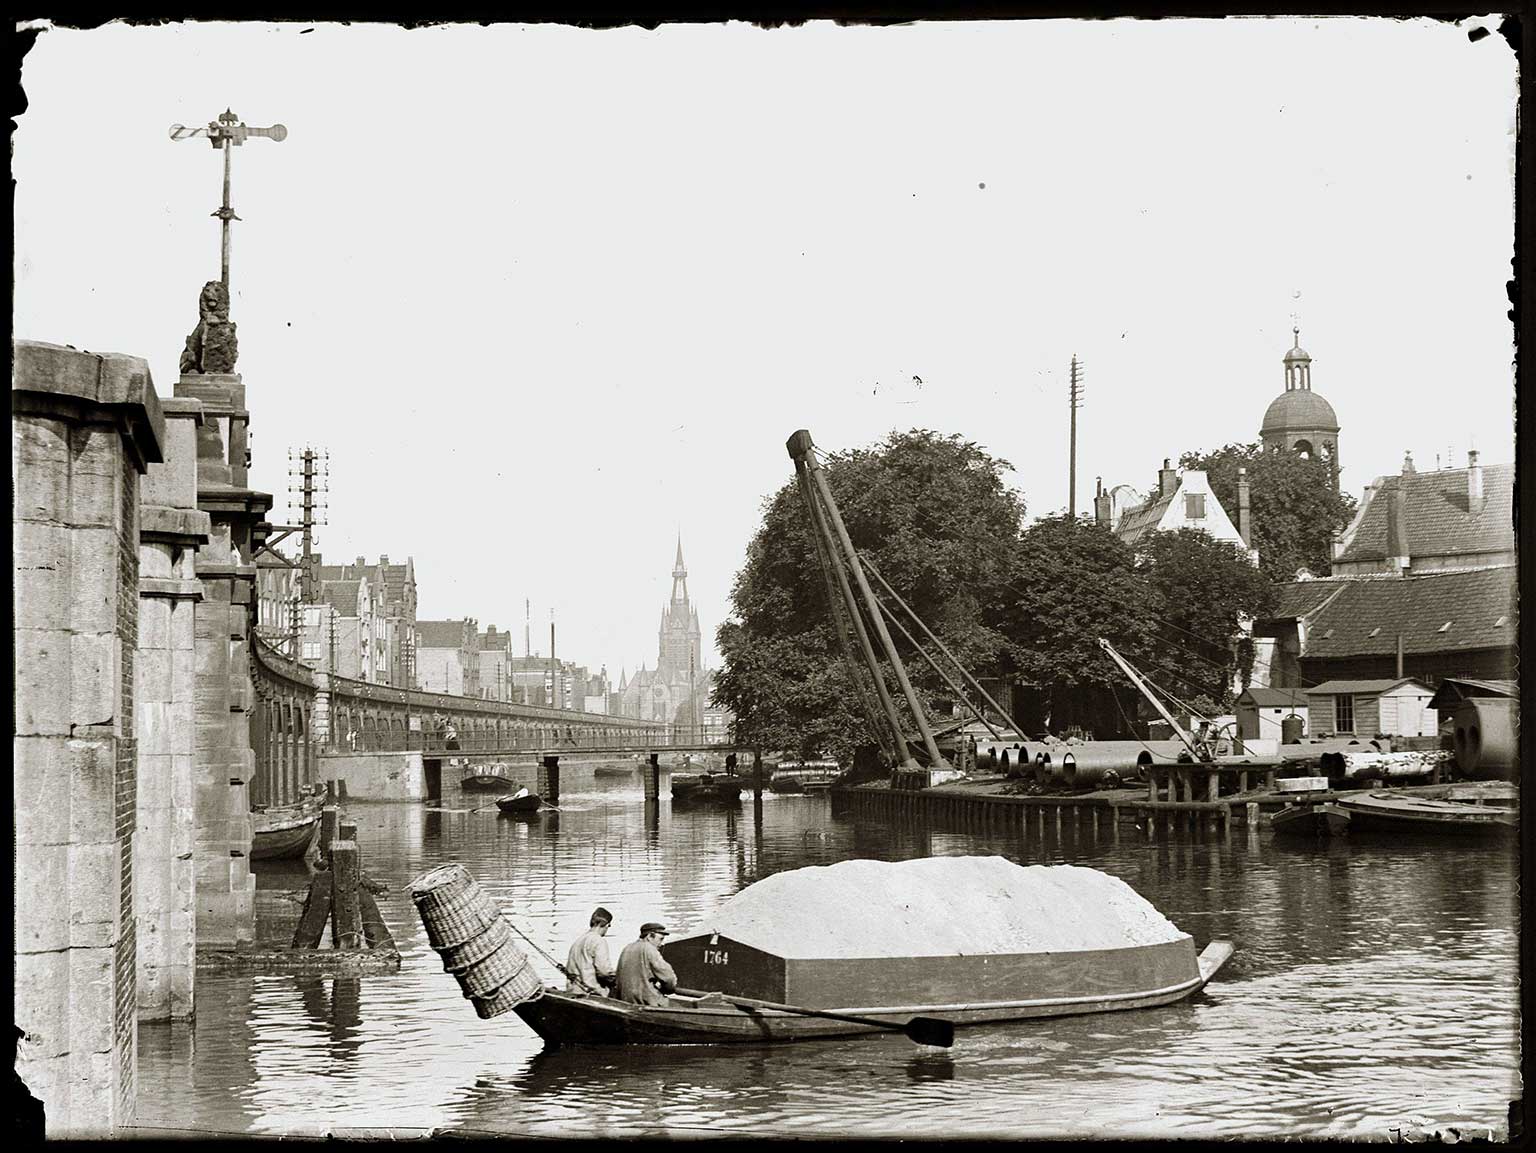 Eilandsgracht, Amsterdam, in 1899, photo by Jacob Olie